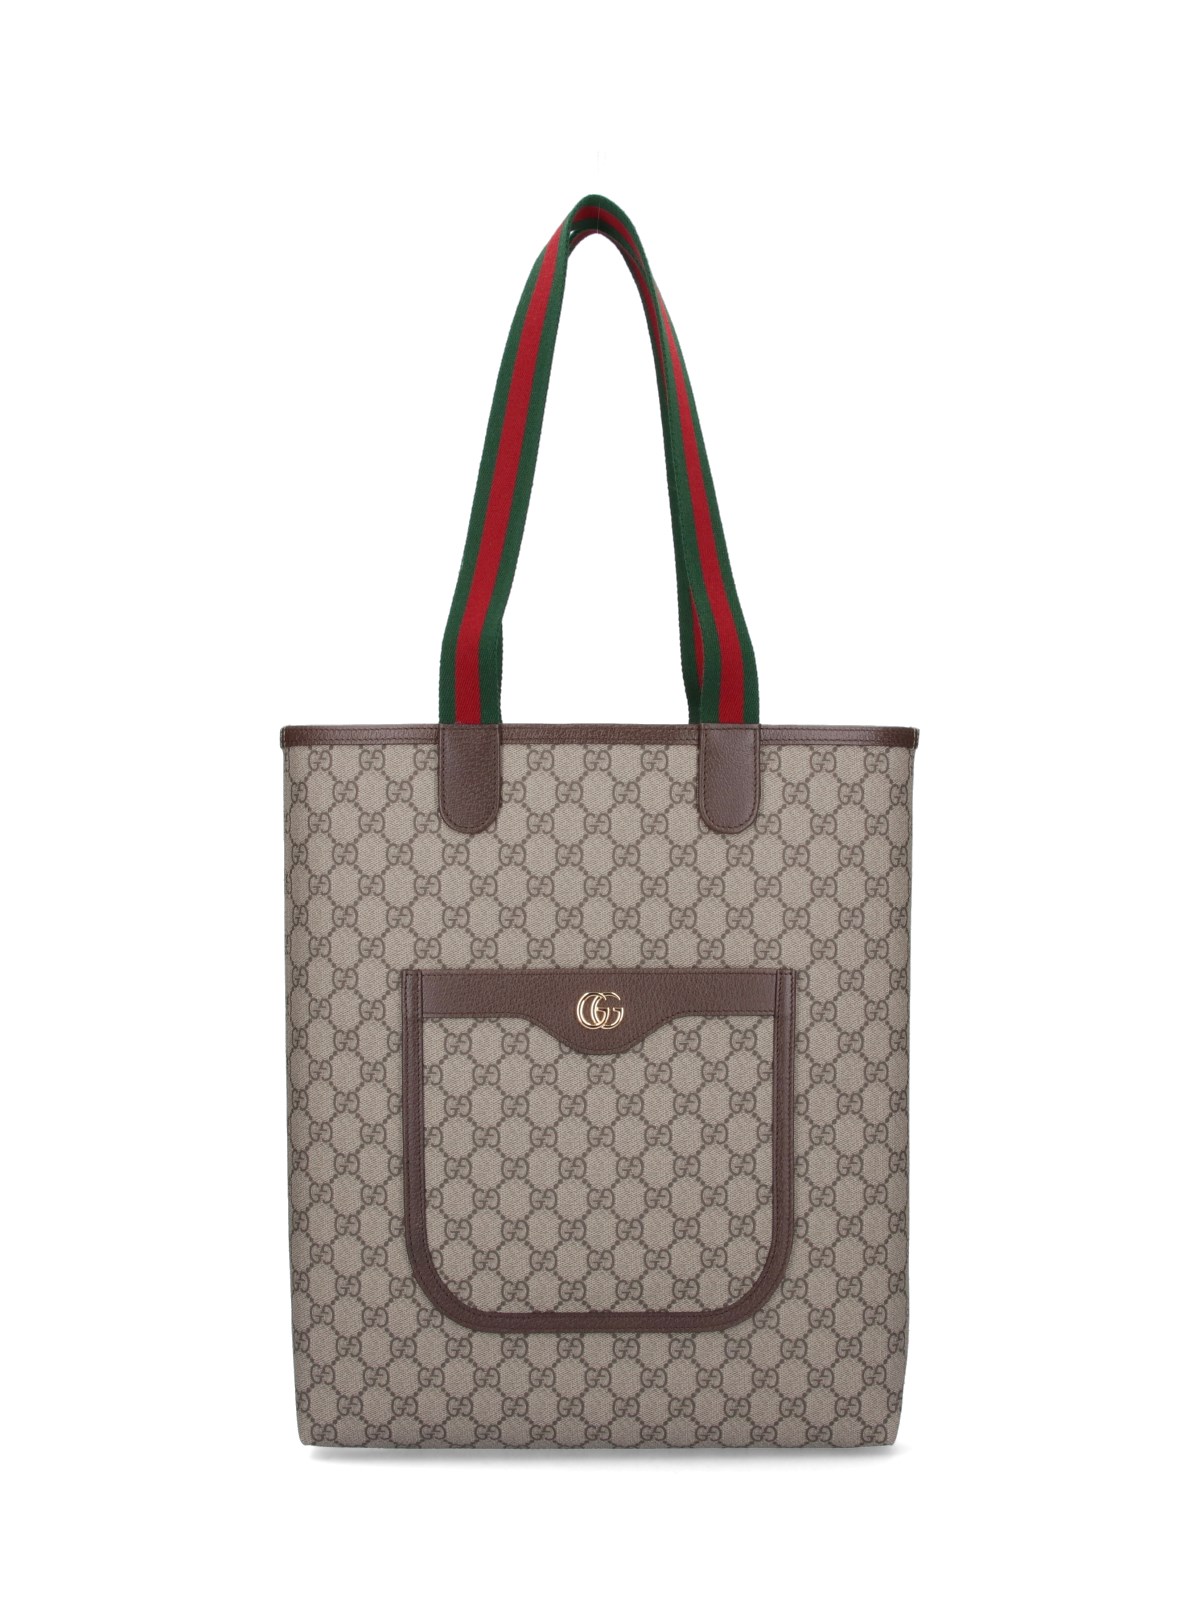 Gucci Ophidia Gg Canvas Tote Bag In Beige